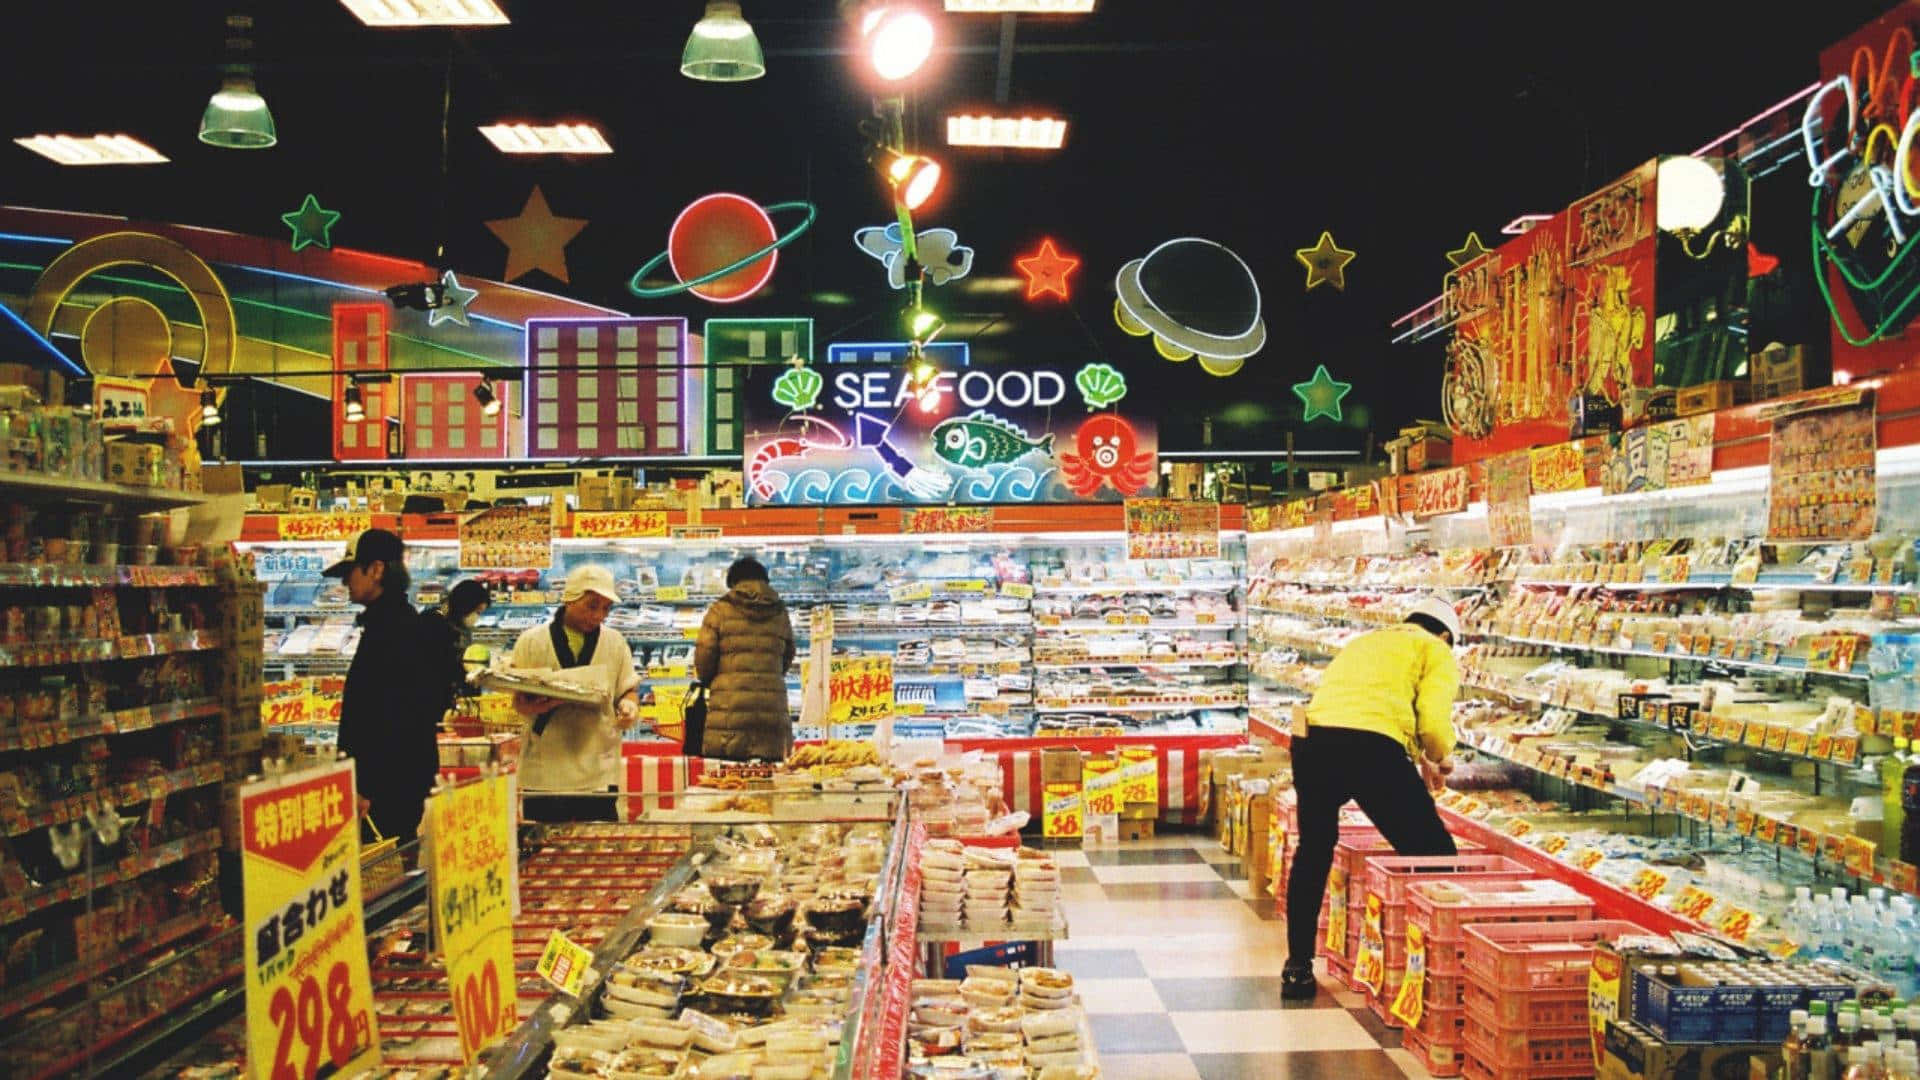 A Store With Many Different Kinds Of Food